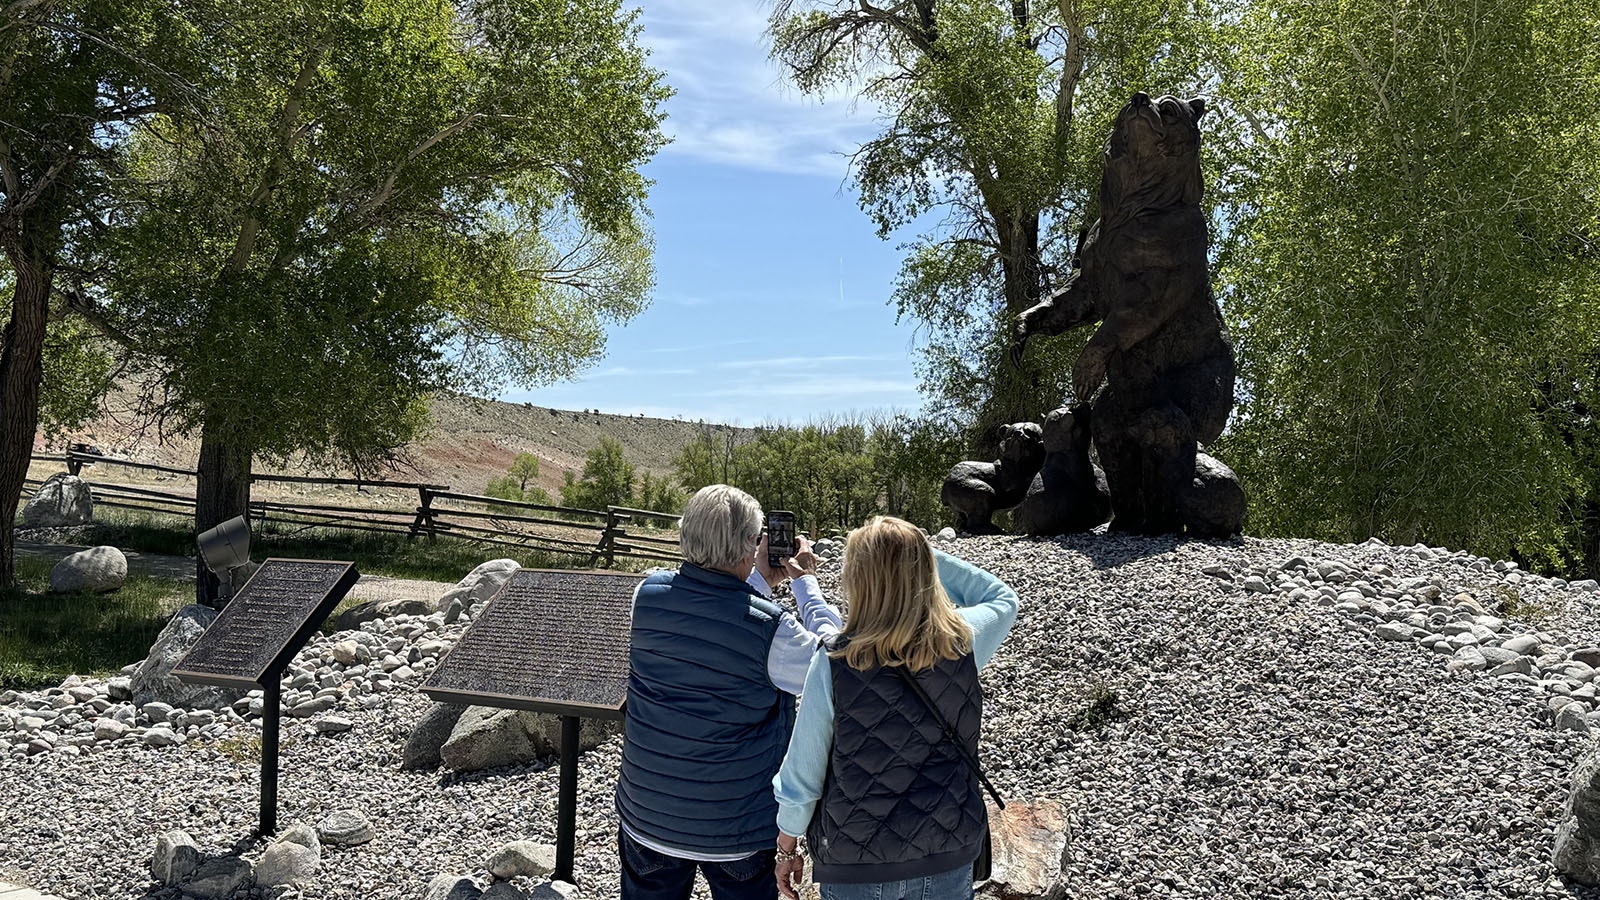 Visitors admire the bronze sculpture of Grizzly 399 and her four cubs in Dubois. The sculpture was funded by the Grizzly 399 Project, an initiative of the Deidre Bainbridge Wildlife Fund.